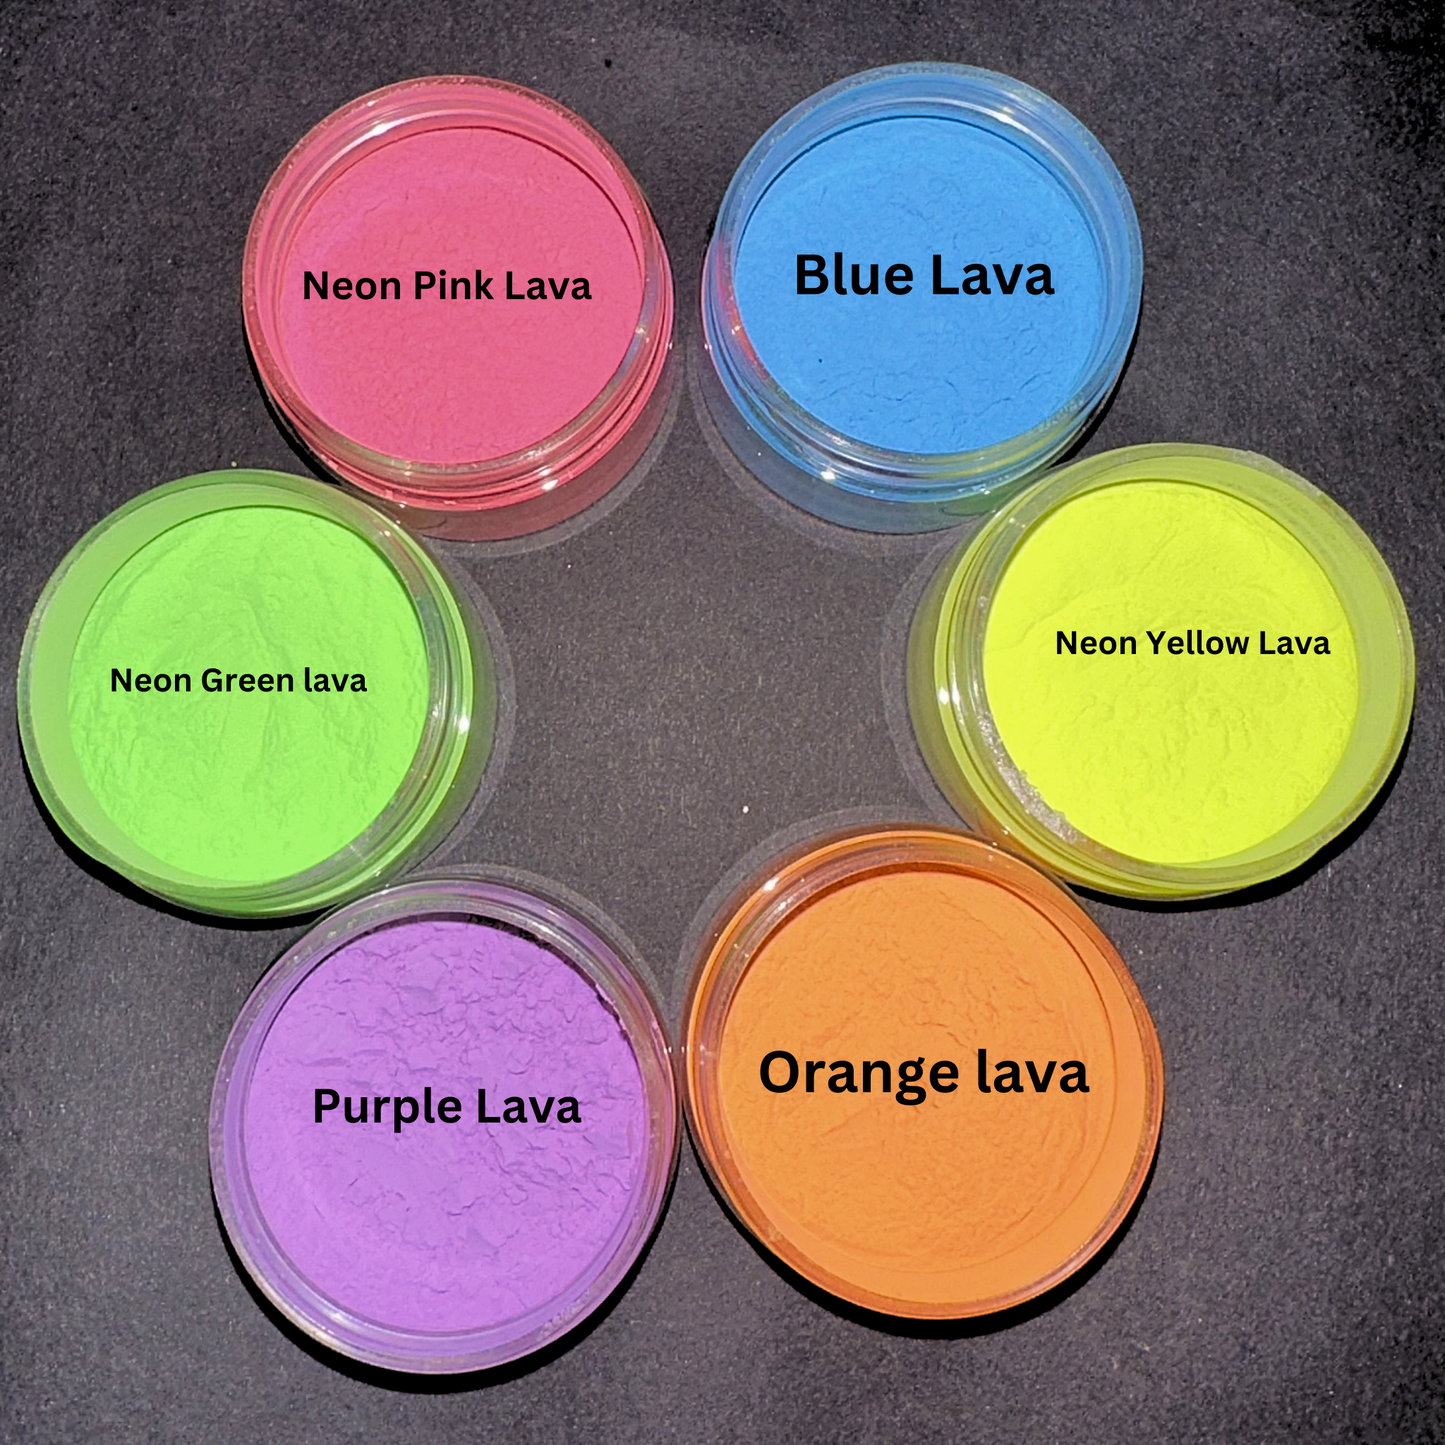 Lava Lamp 6 oz Glow Mica Set With a FREE Mica Spoon! No Coupons